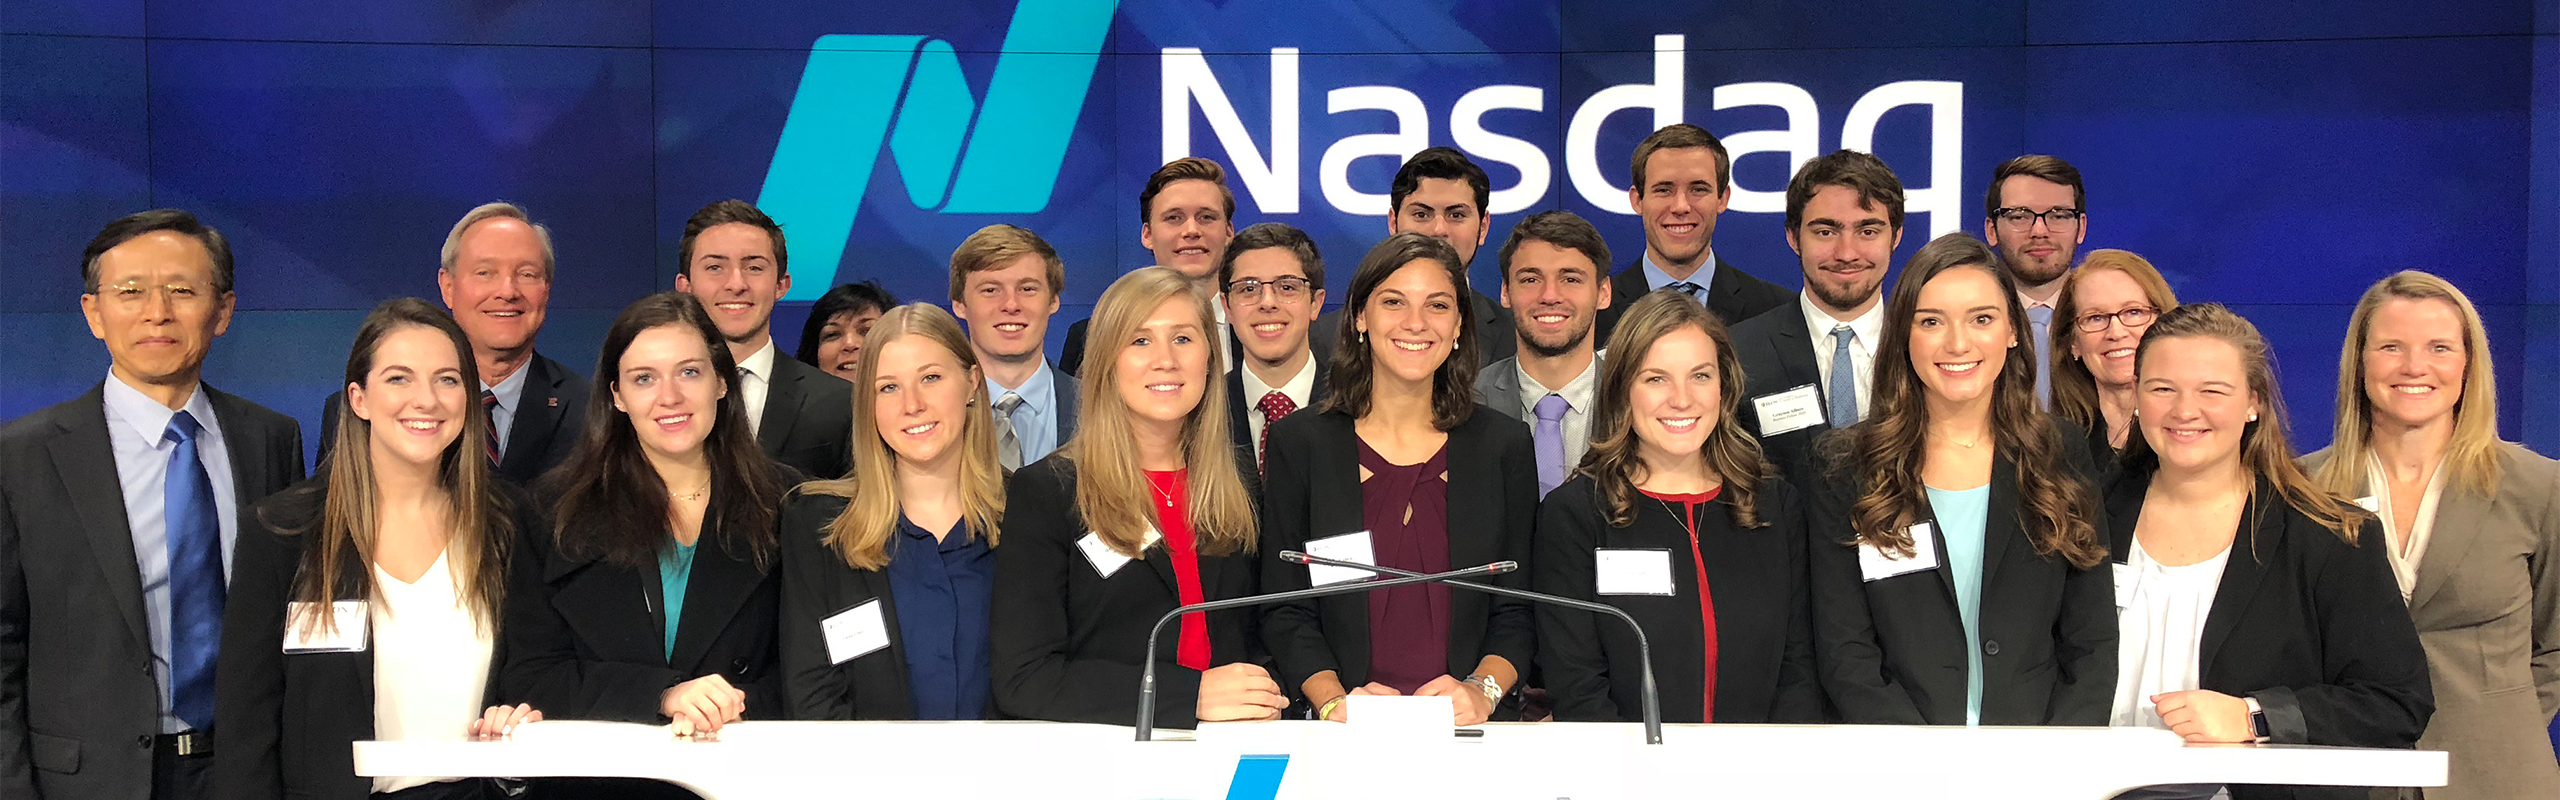 group standing at in front of Nasdaq sign